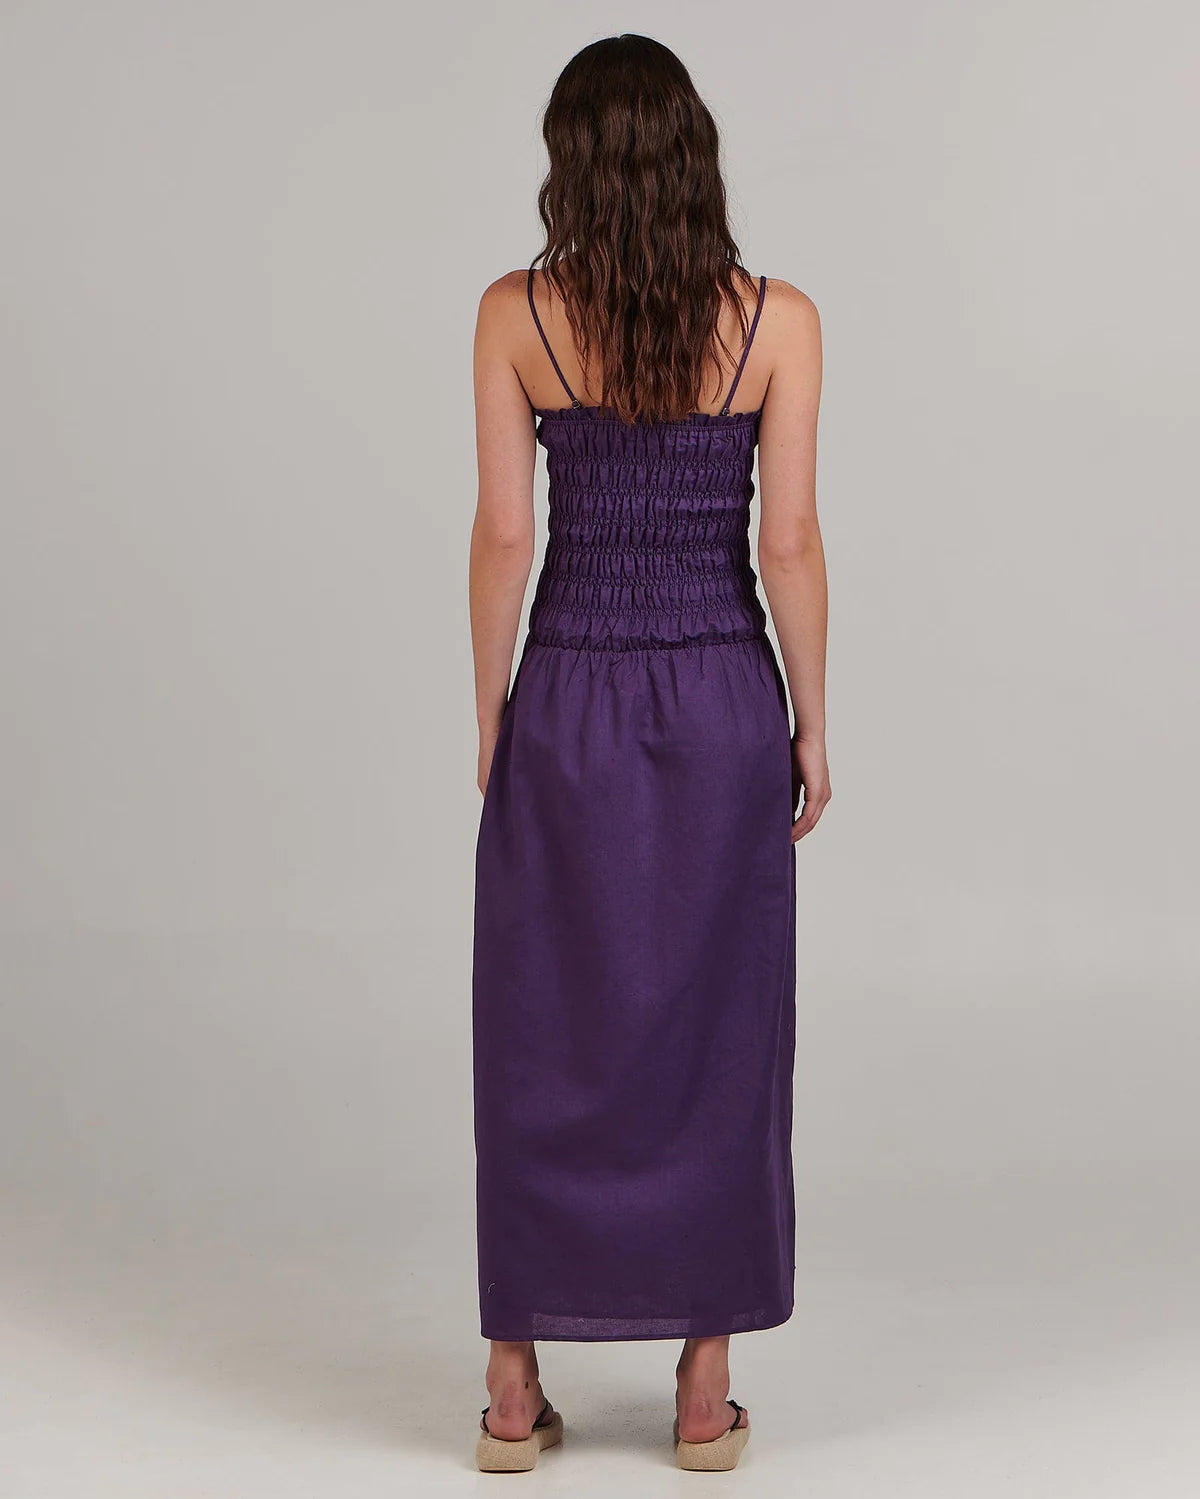 With a shirred bodice and flared skirt this elegant sundress makes a splash in a saturated purple hue. The shoestring straps can be worn as intended or tucked away to convert to a strapless dress. Wear with stacked heels for a night out or with bare feet by day